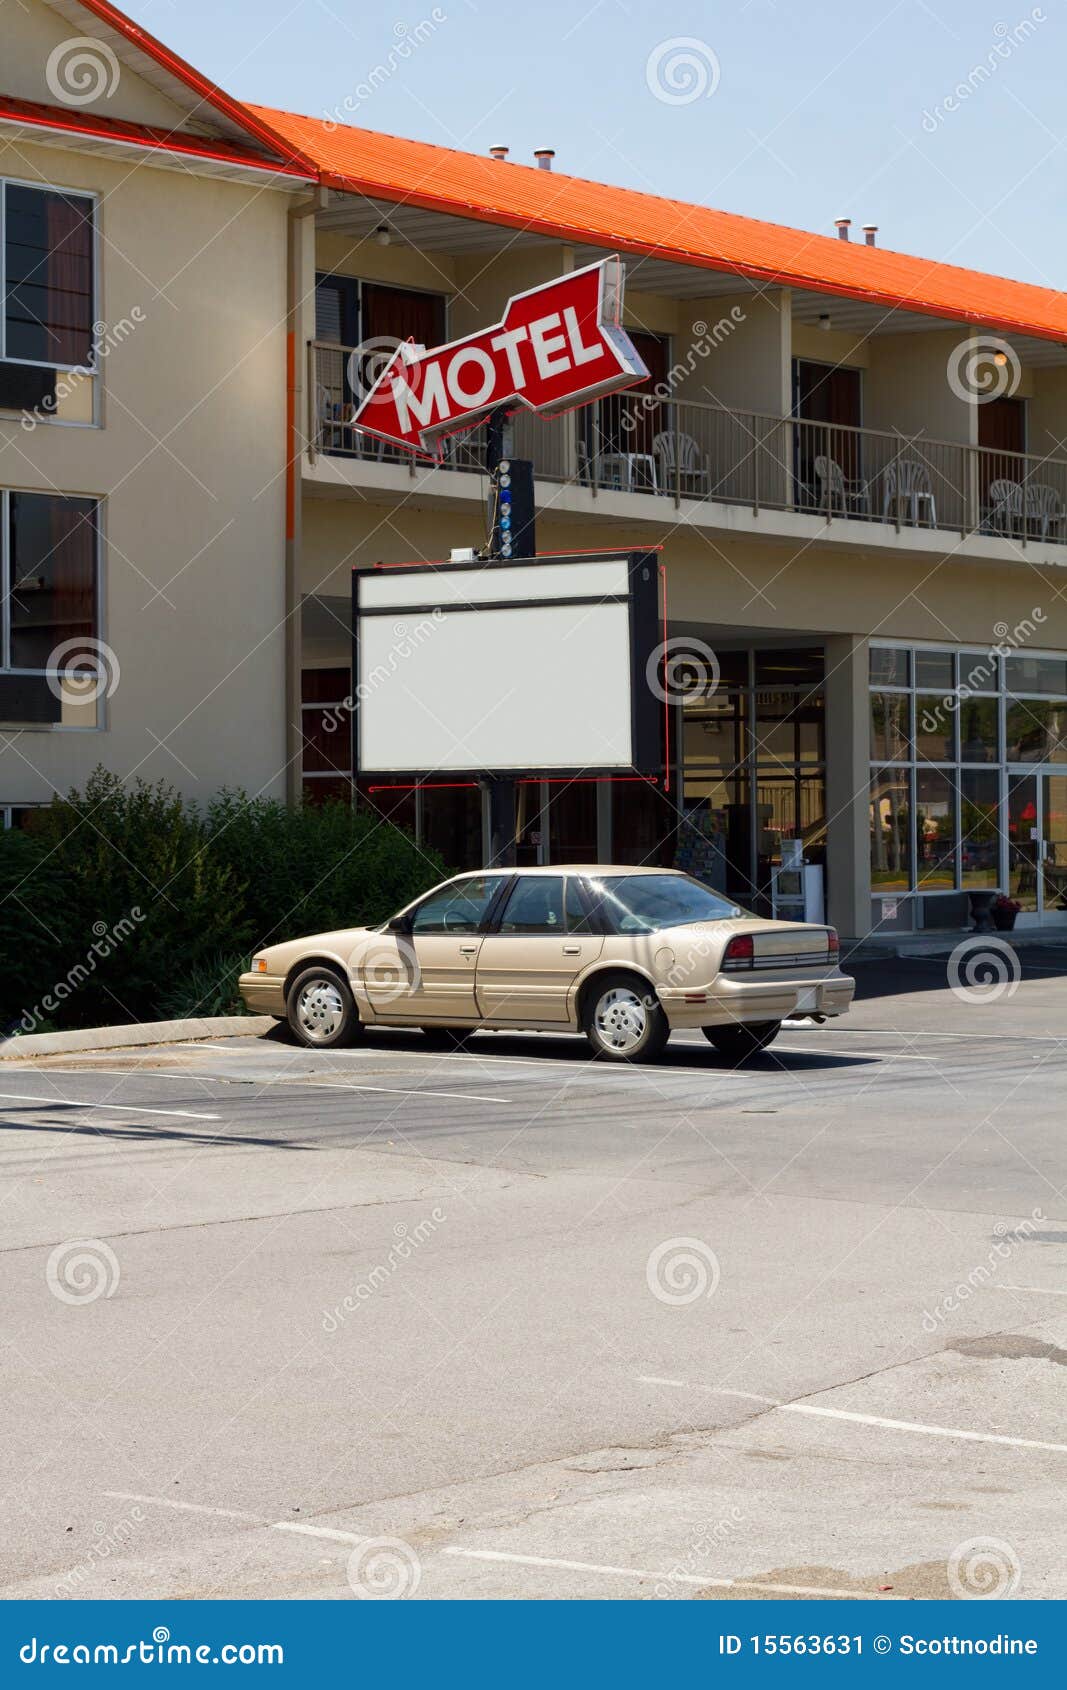 cheap motel & old style sign